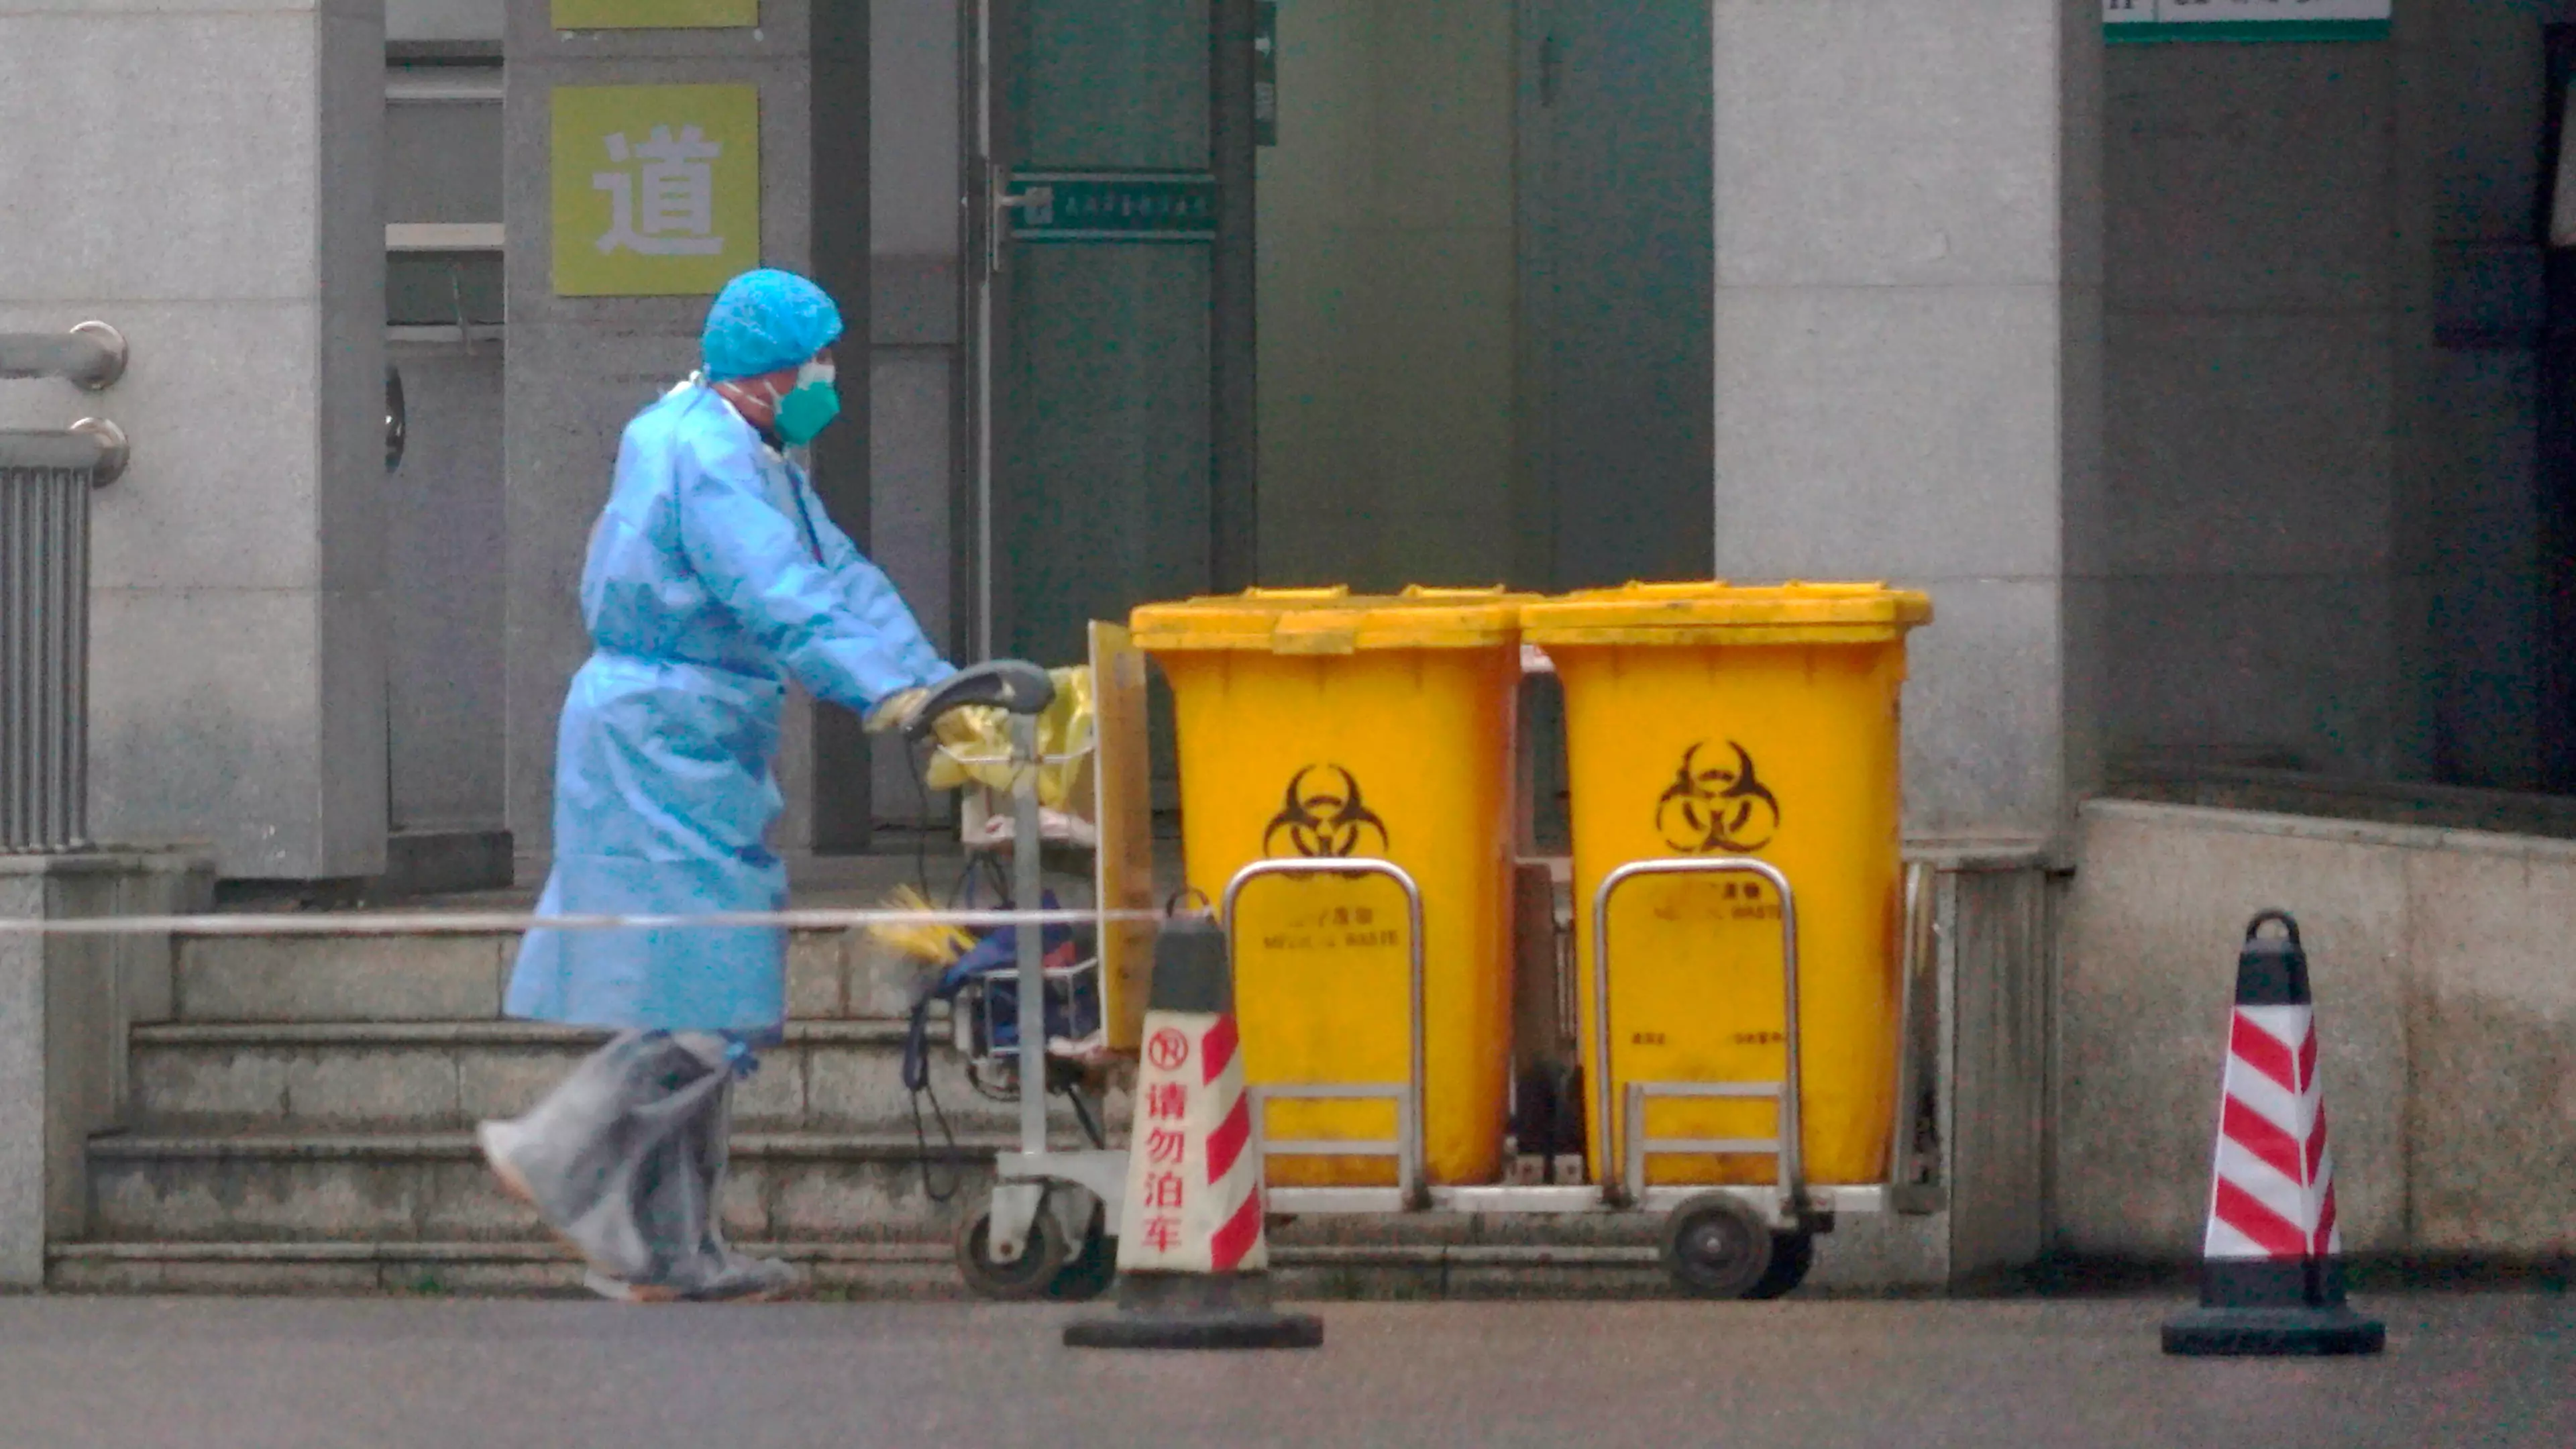 Second Chinese City To Be Placed In Lockdown To Stop Coronavirus From Spreading